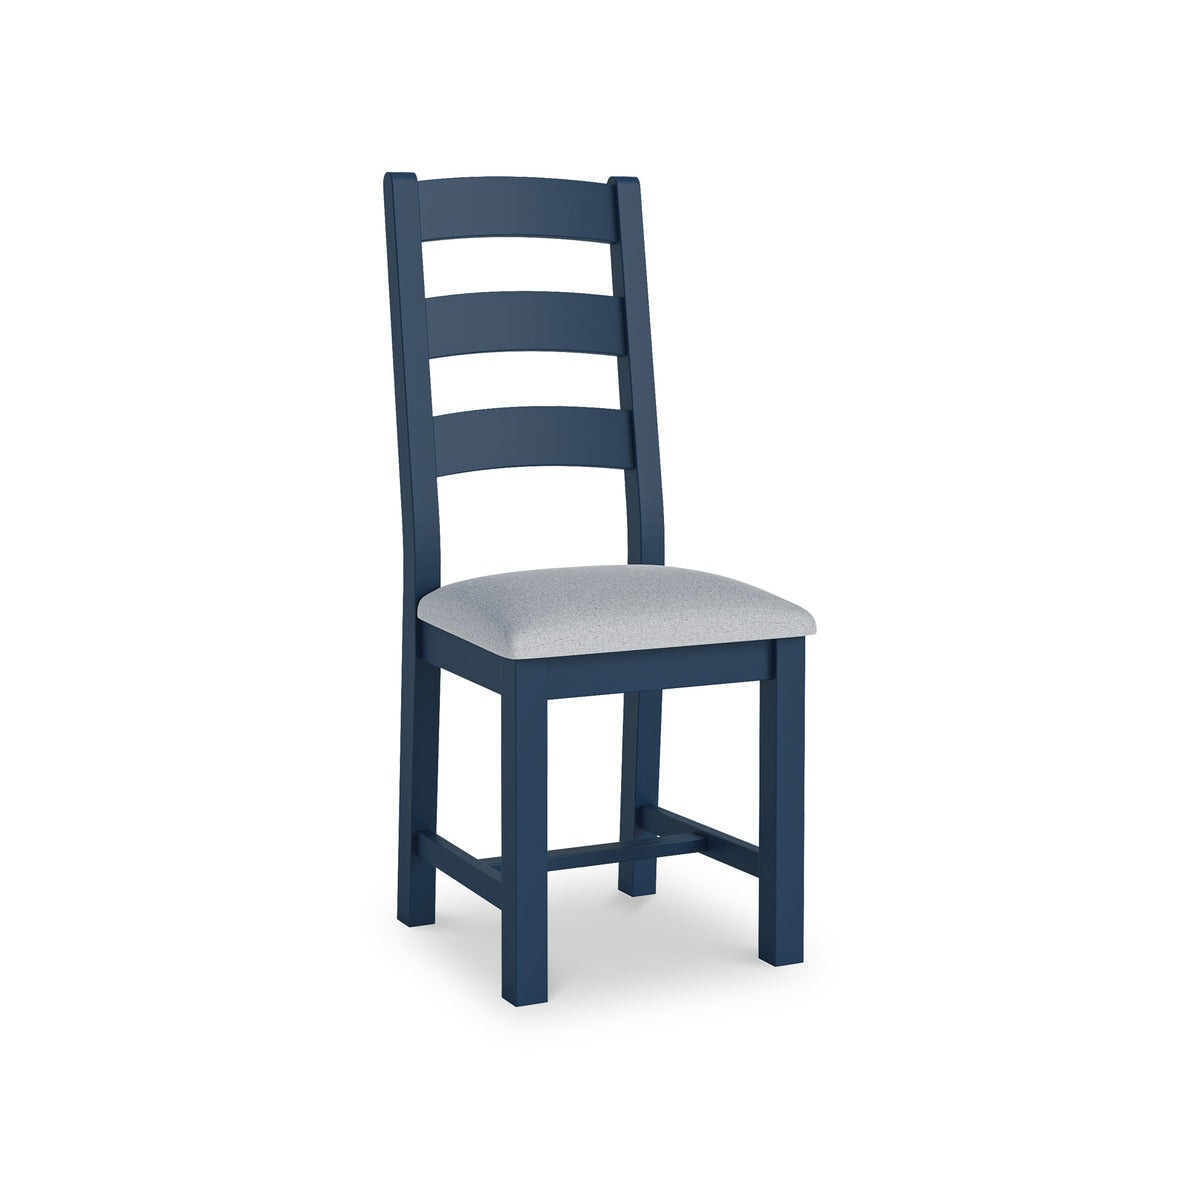 Bude Navy Dining Chair with Fabric Seat from Roseland Furniture